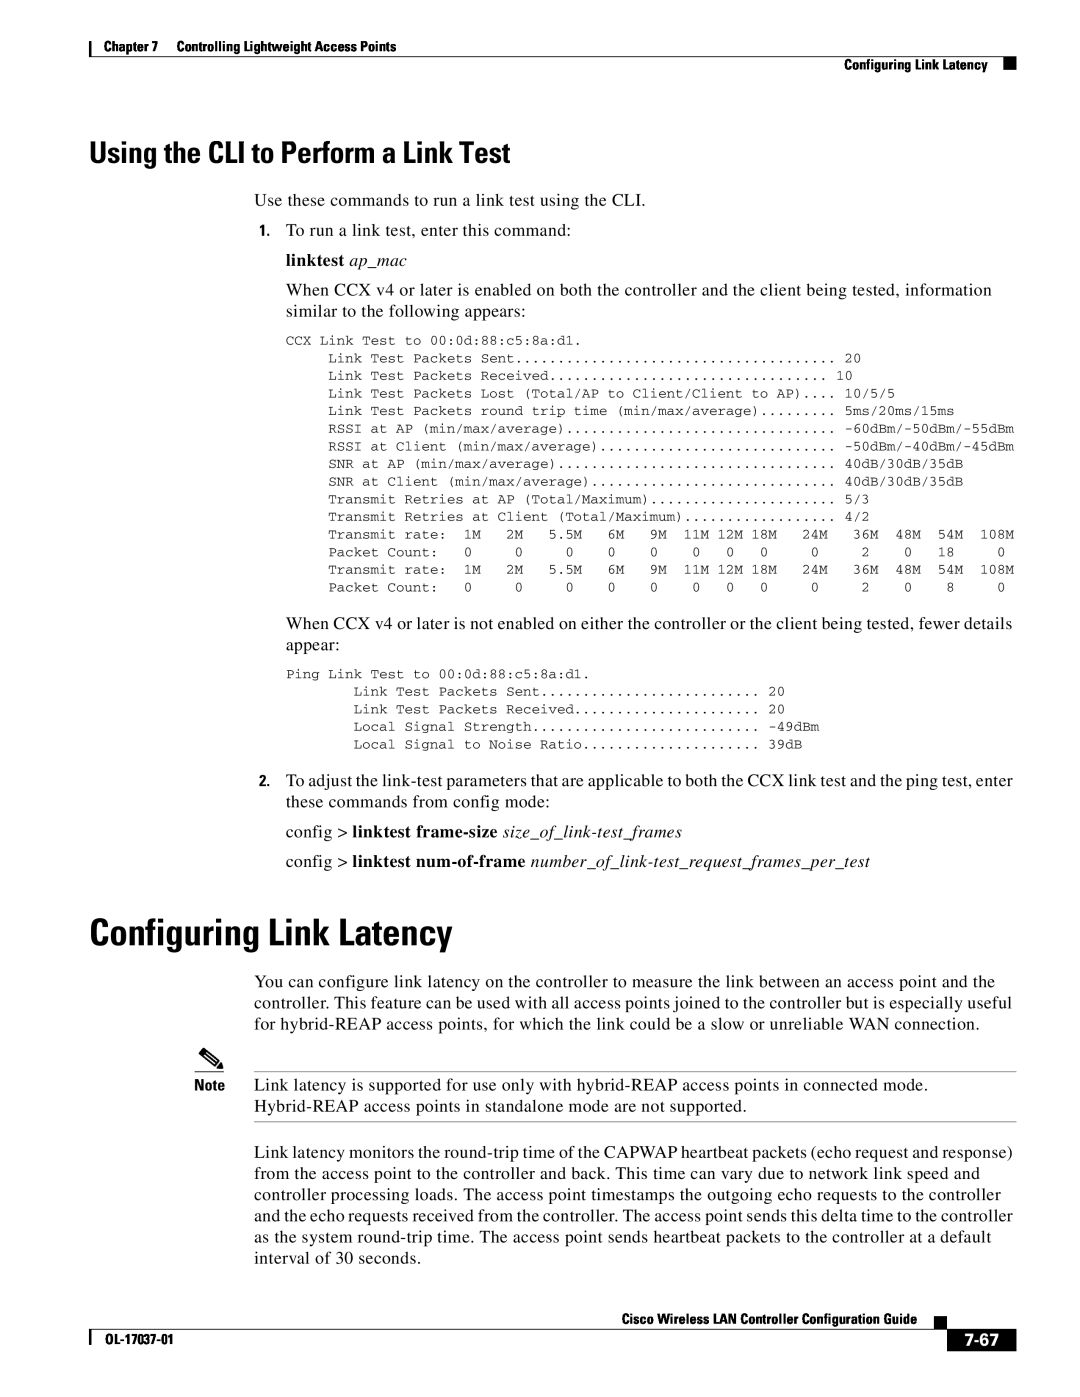 Cisco Systems OL-17037-01 manual Configuring Link Latency, Using the CLI to Perform a Link Test, 7-67 